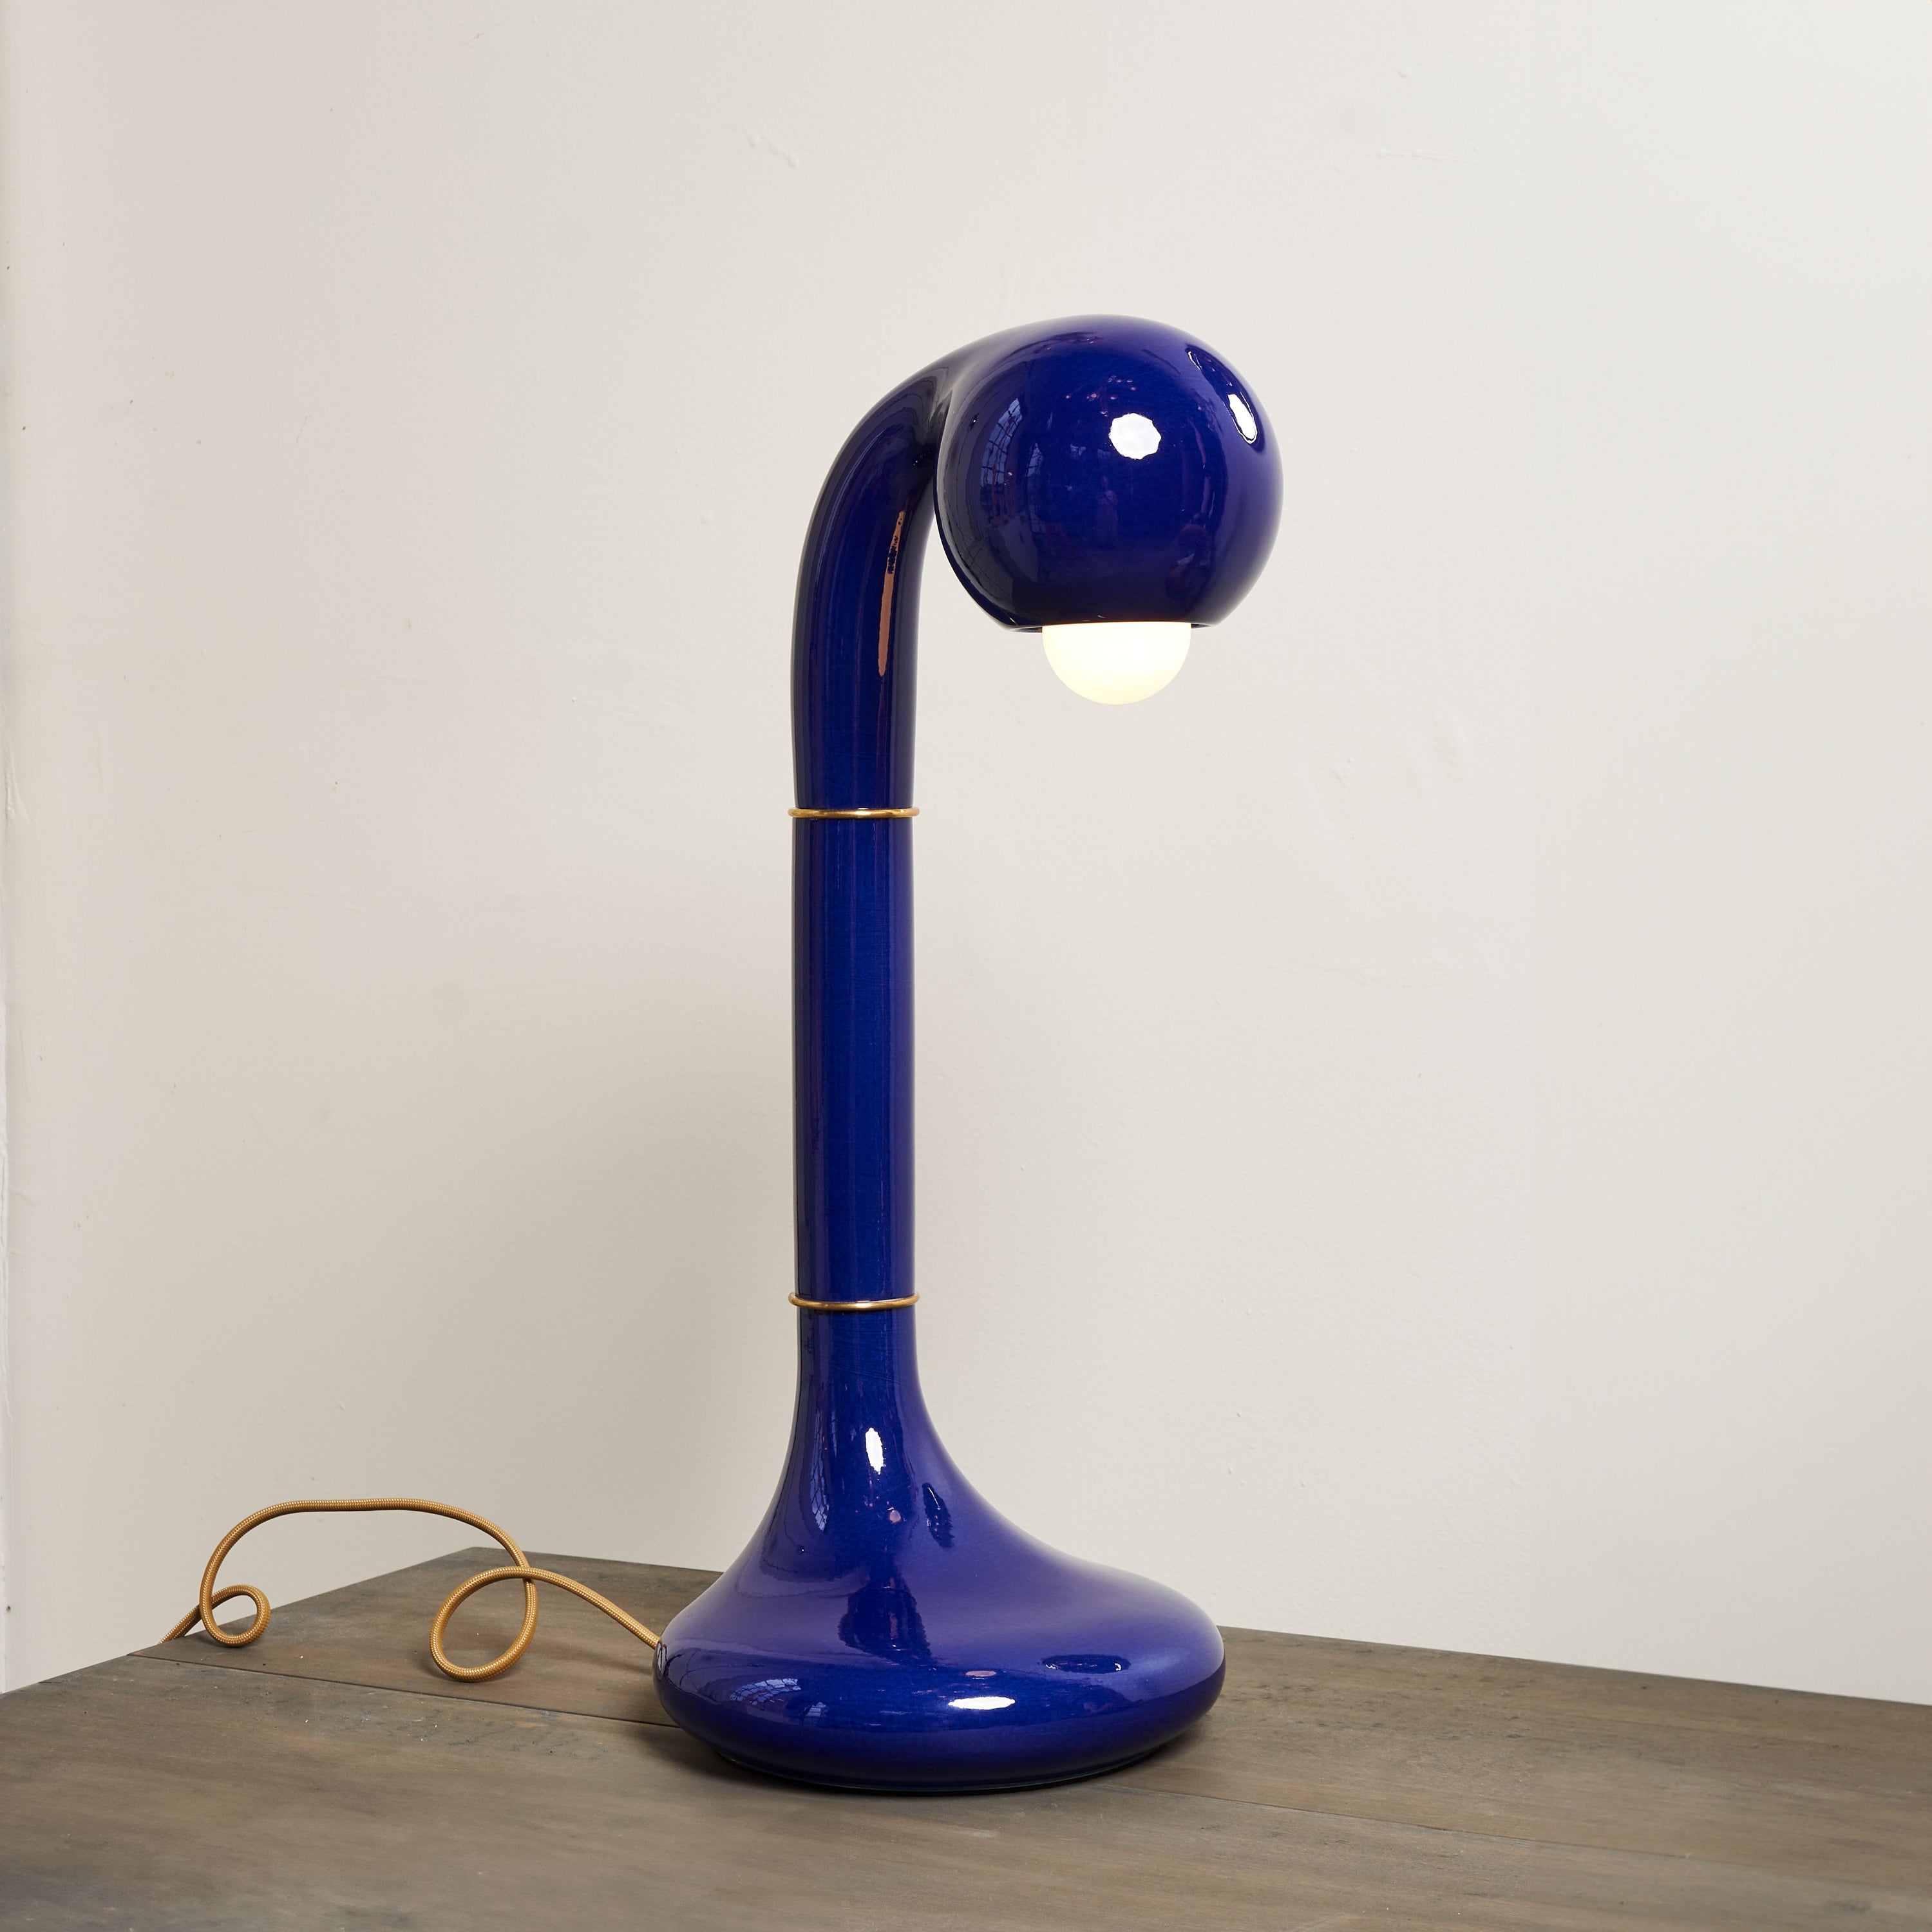 18" TABLE LAMP